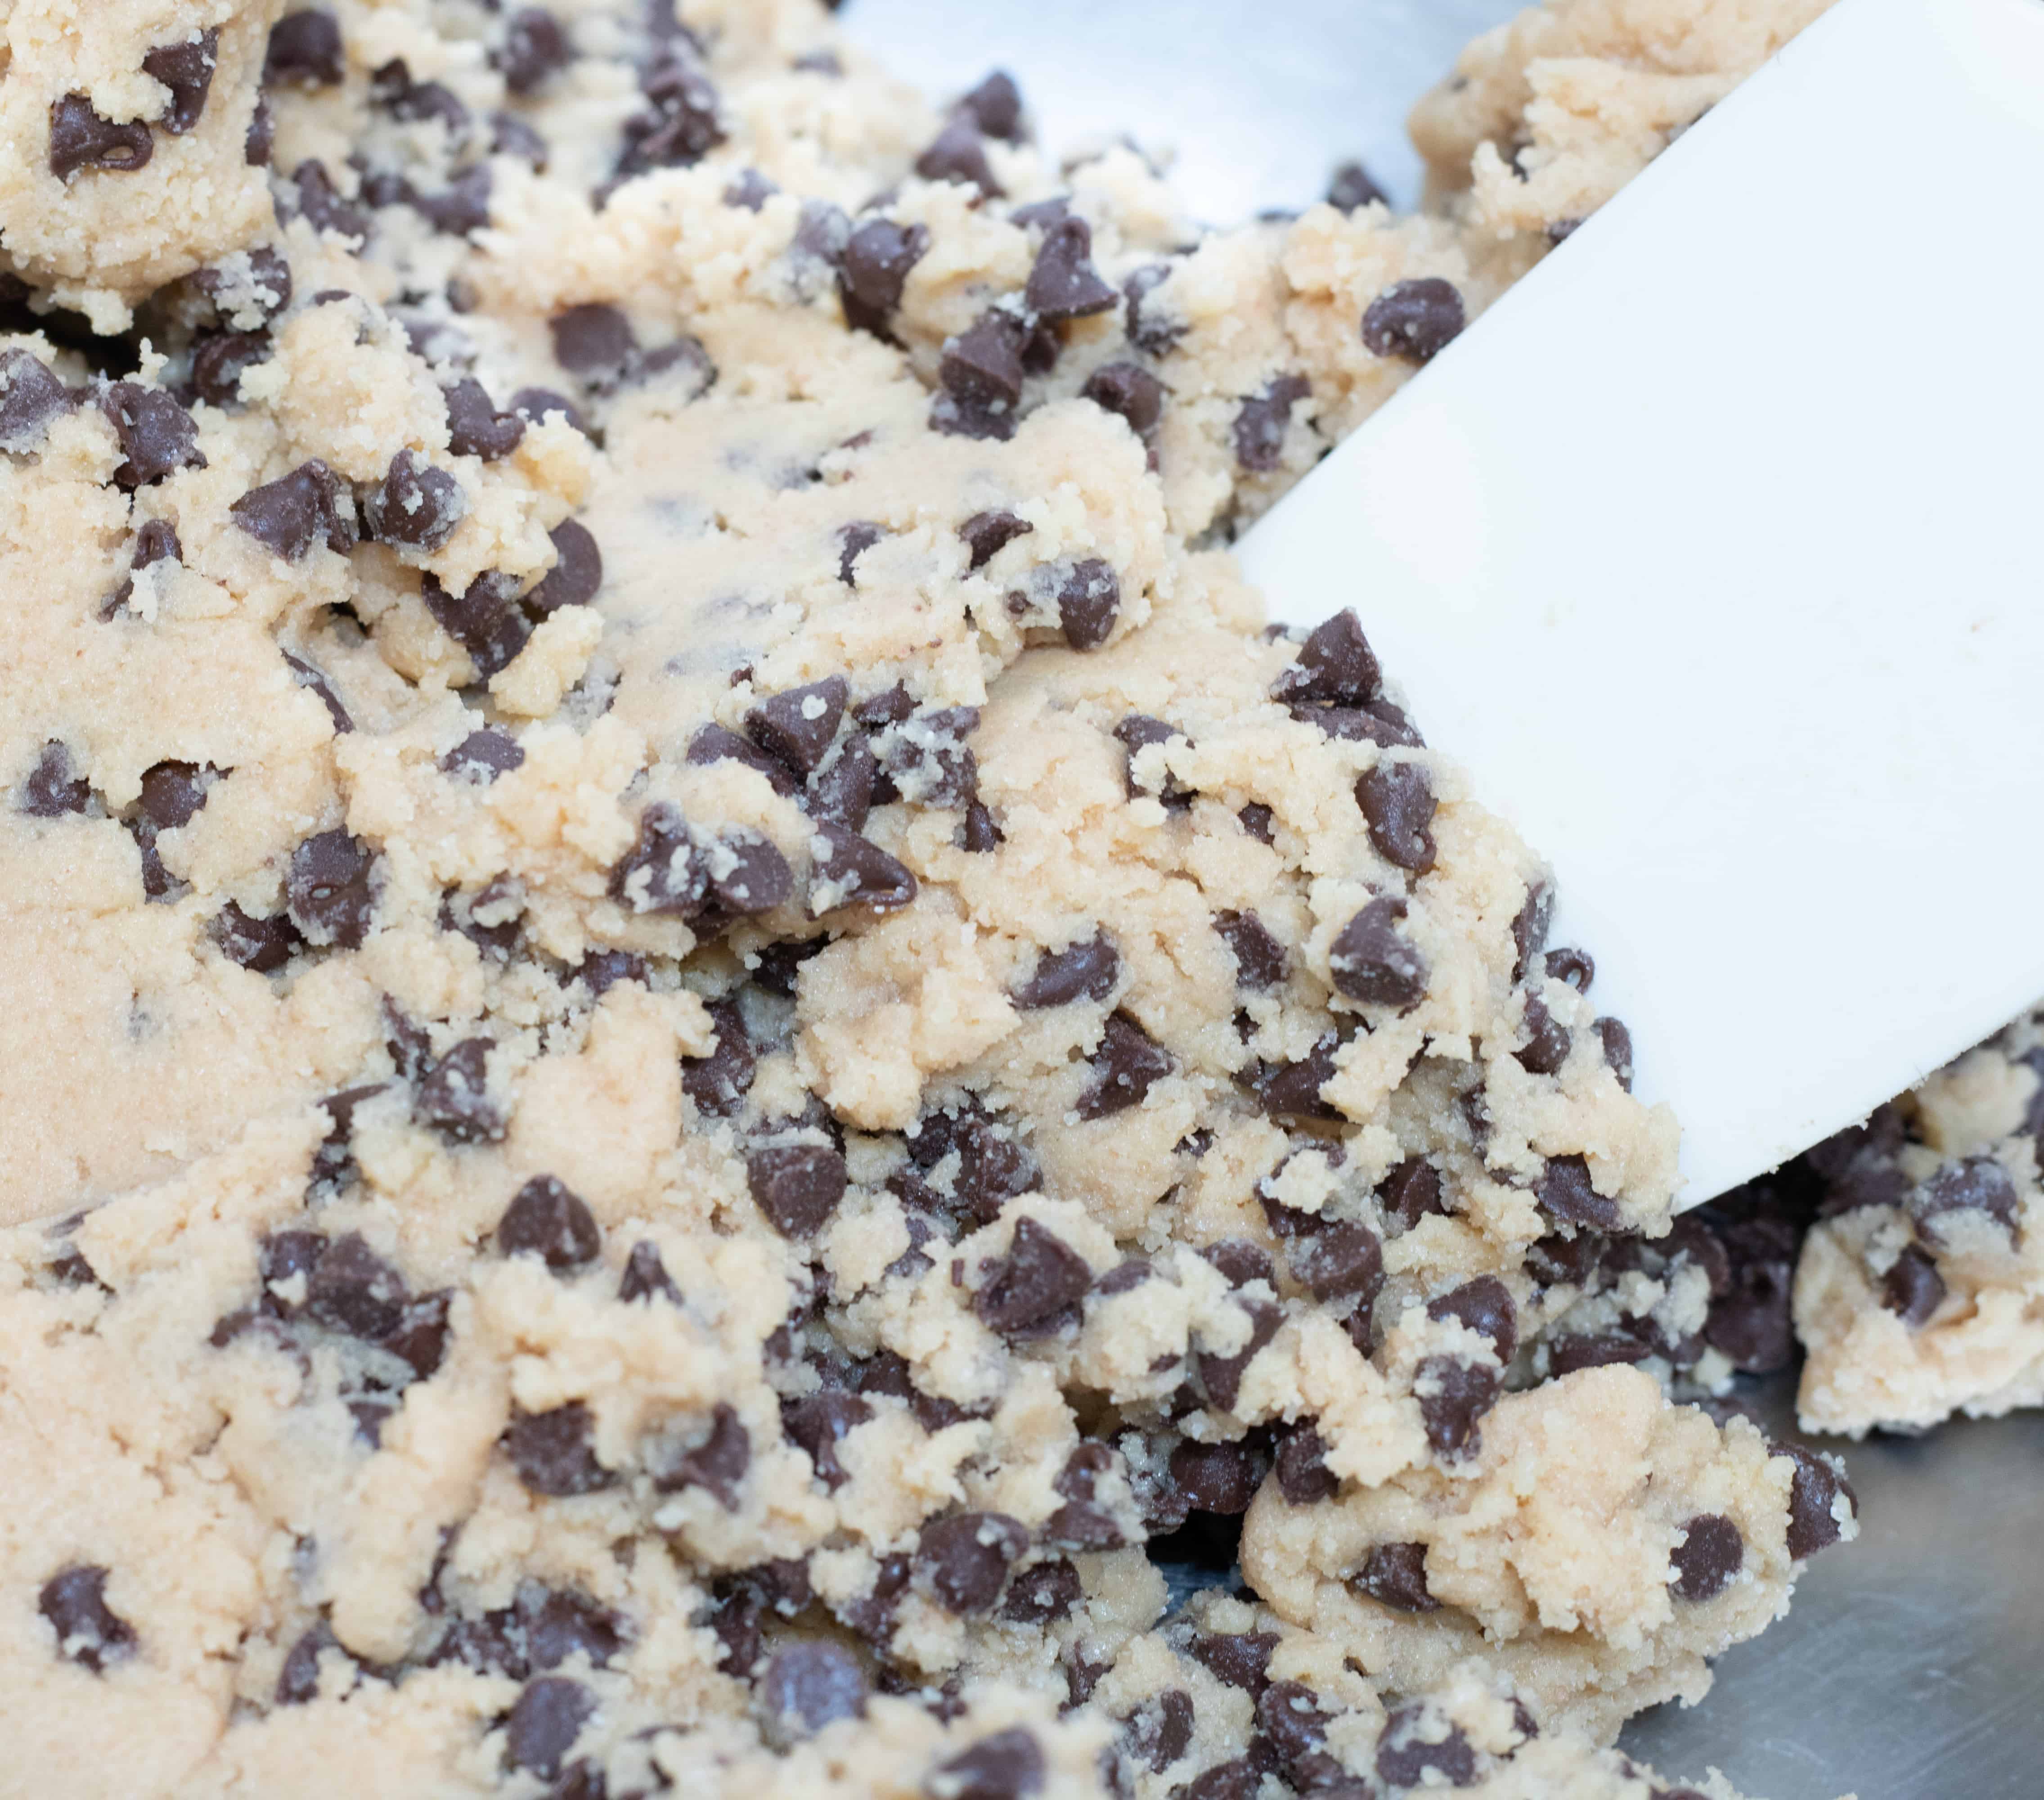 strawberry cookie dough with chocolate chips